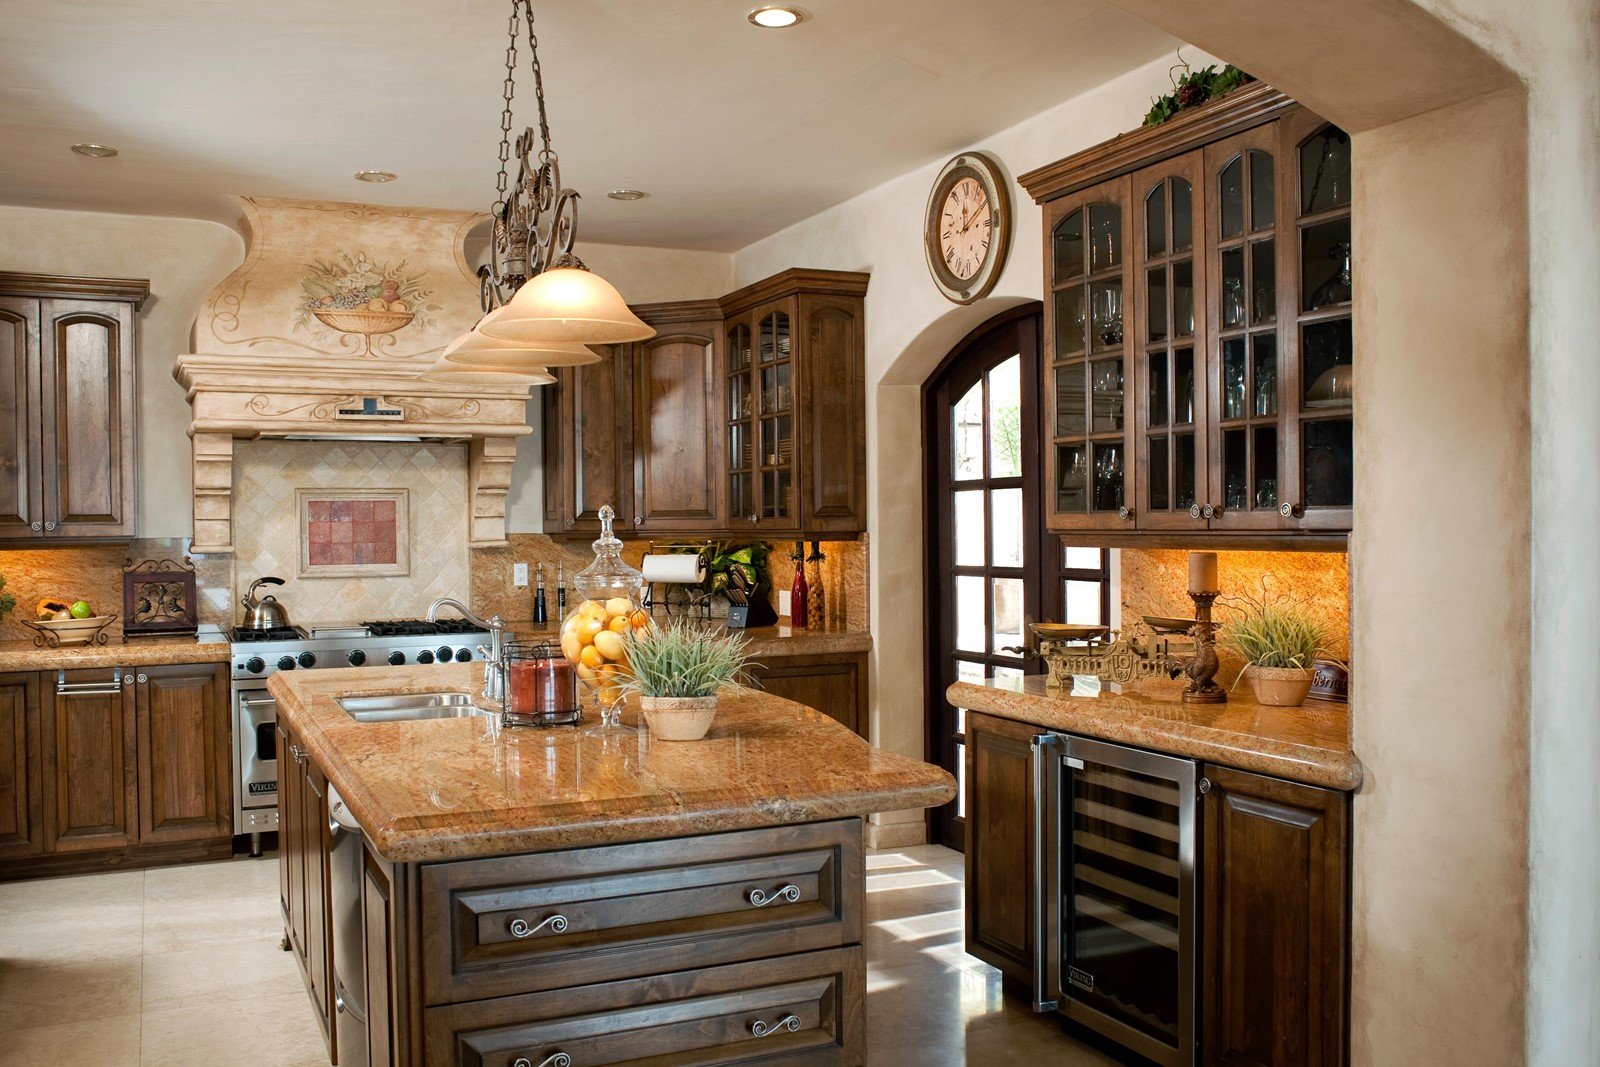 The main kitchen of the villa with a large center island and granite countertops.